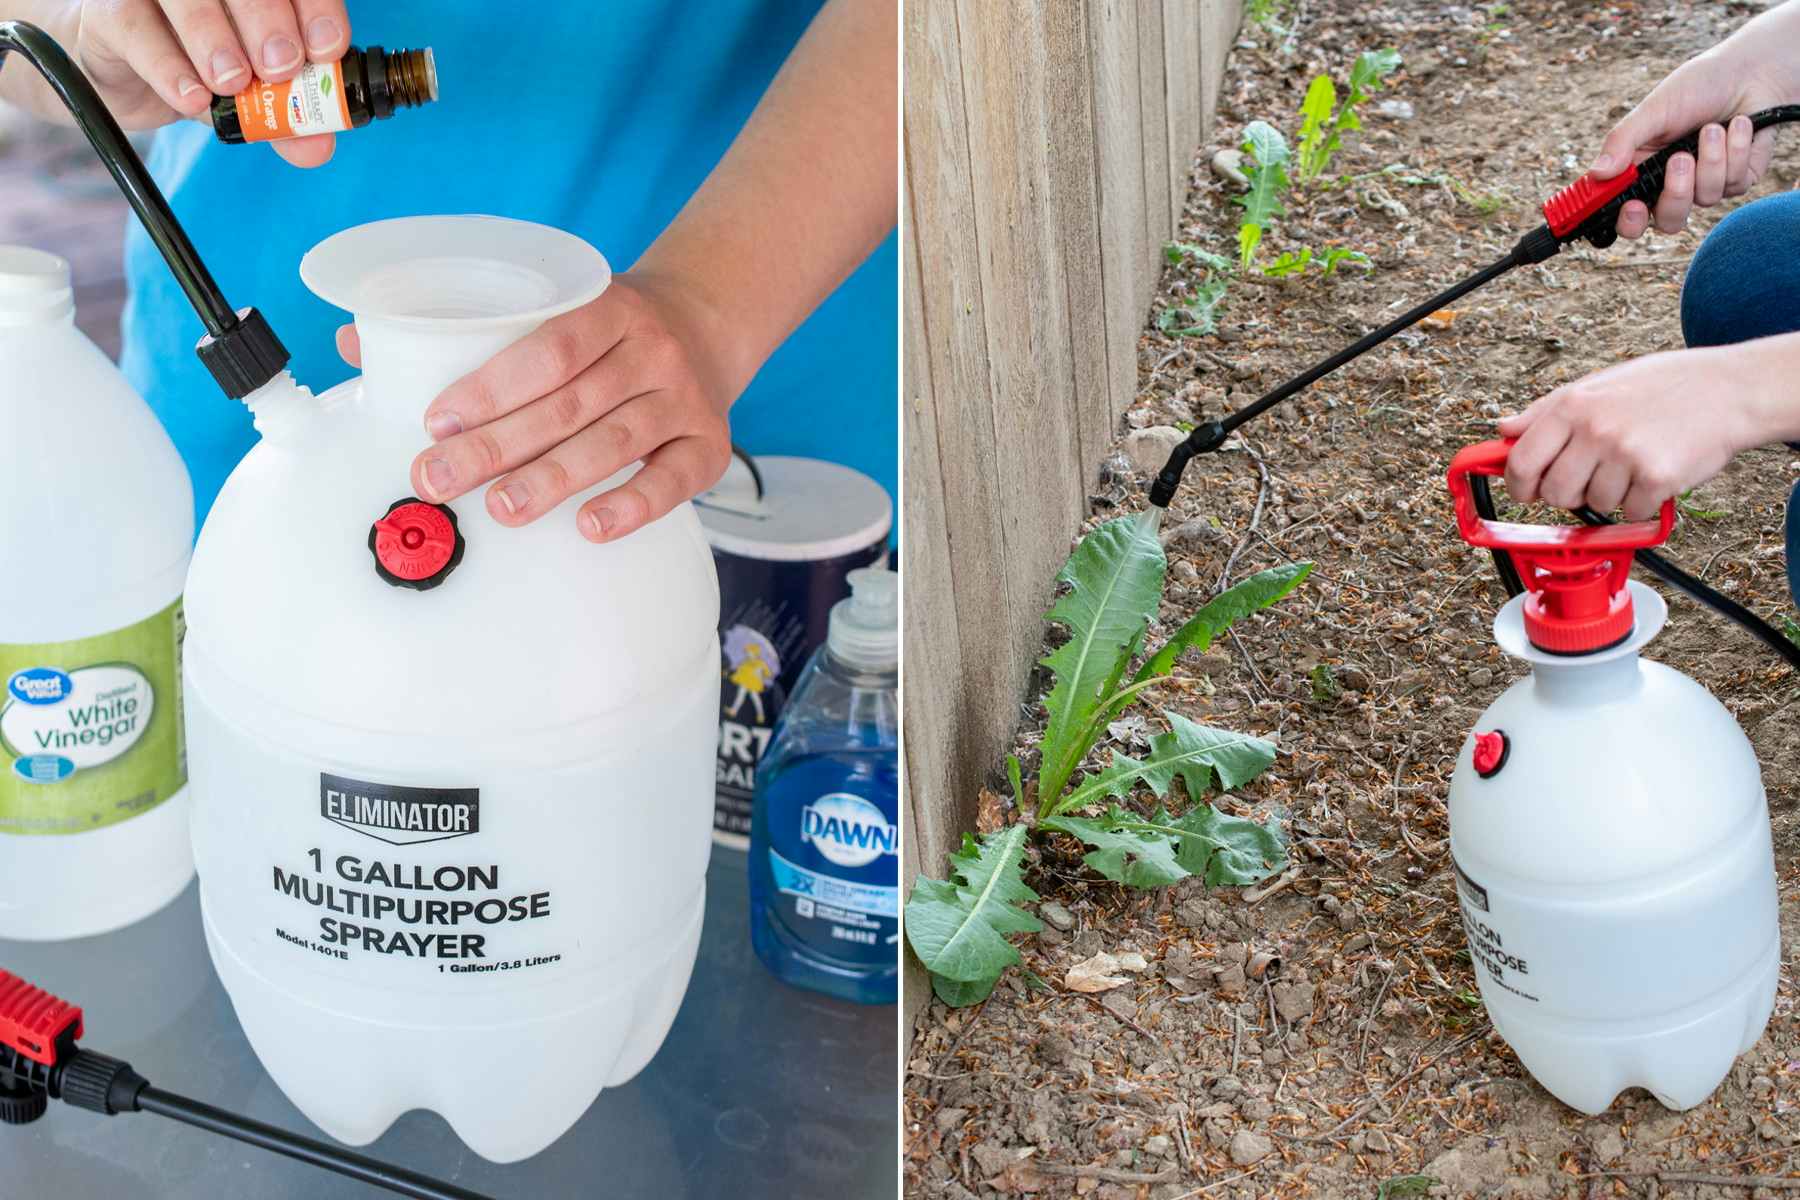 essential oils, vinegar, salt and Dawn dish soap being added to a 1 gallon sprayer and sprayed on weeds near a fence